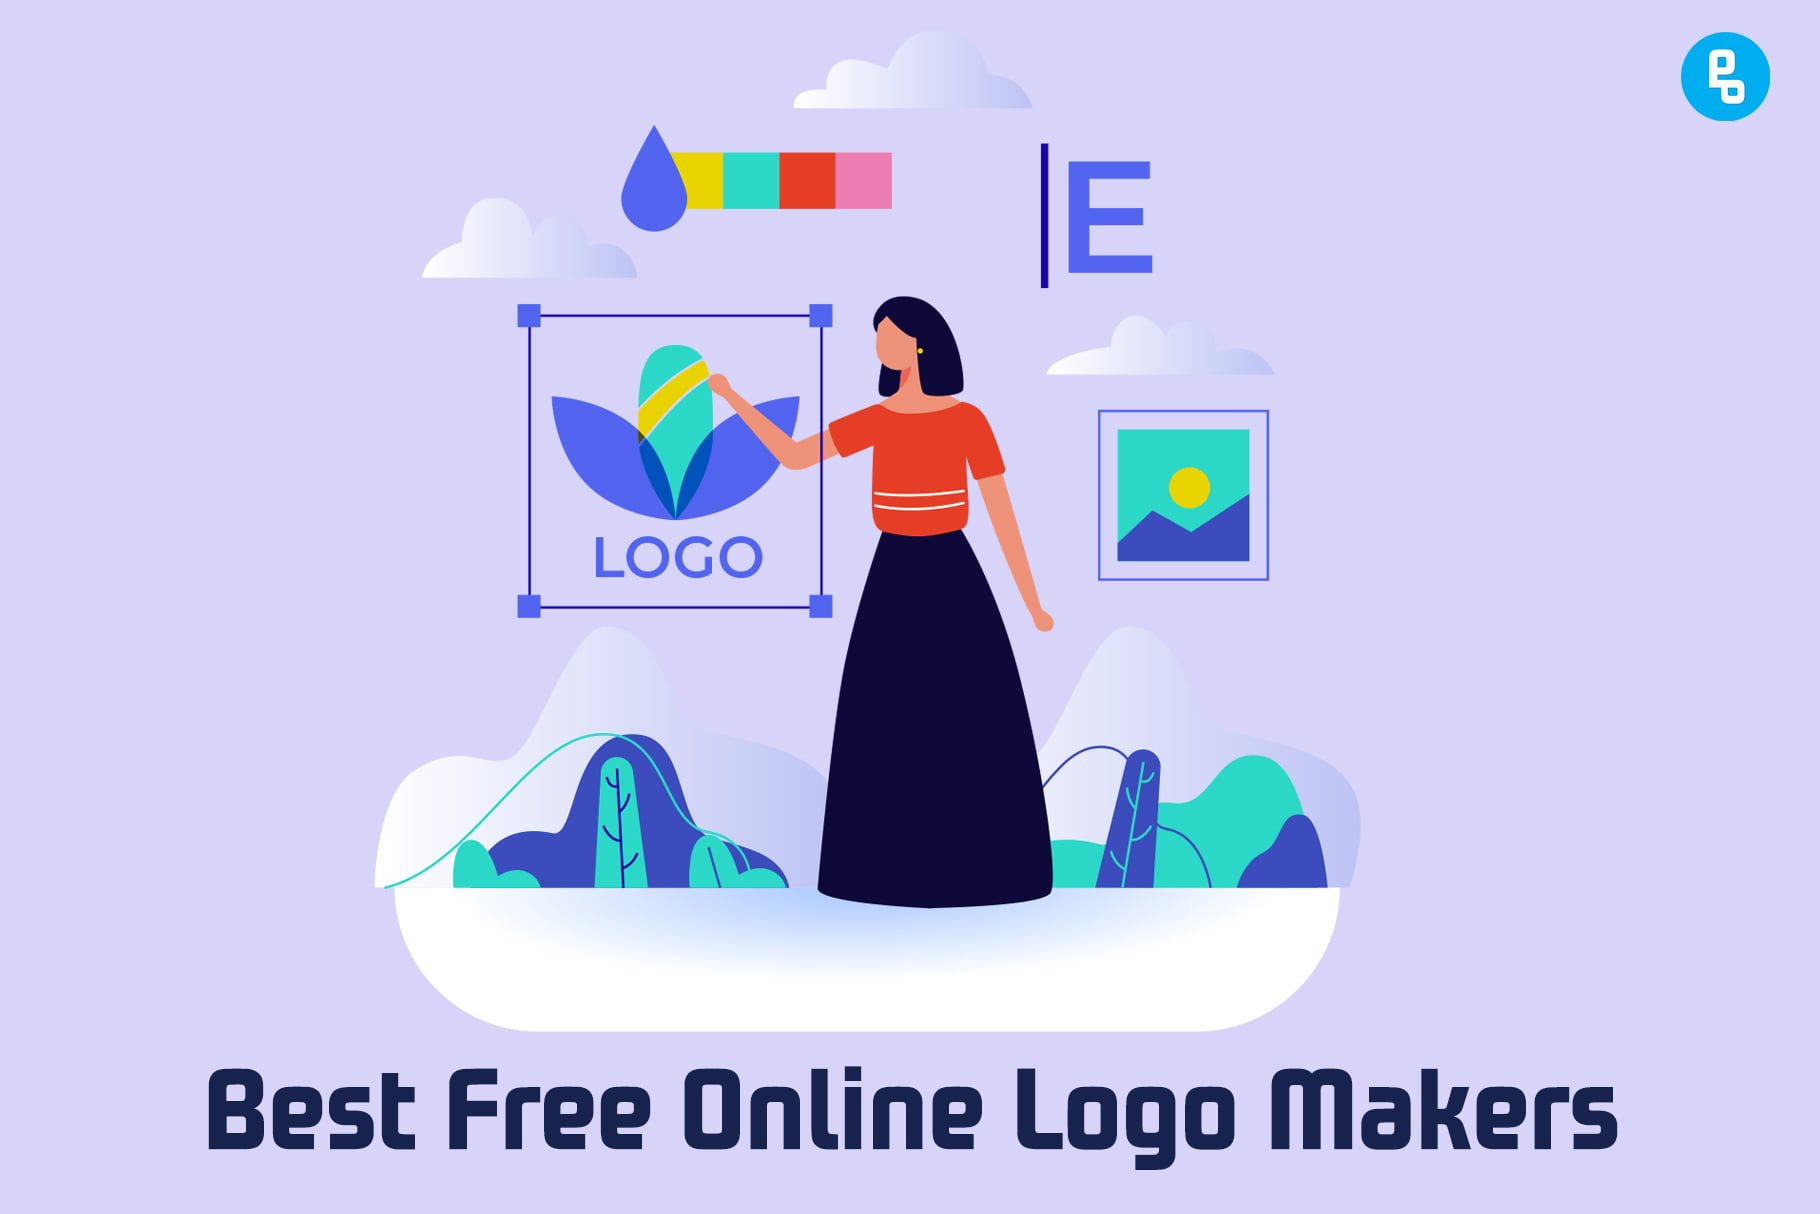 10 Best Free Online Logo Makers for Eye-Catching Logos